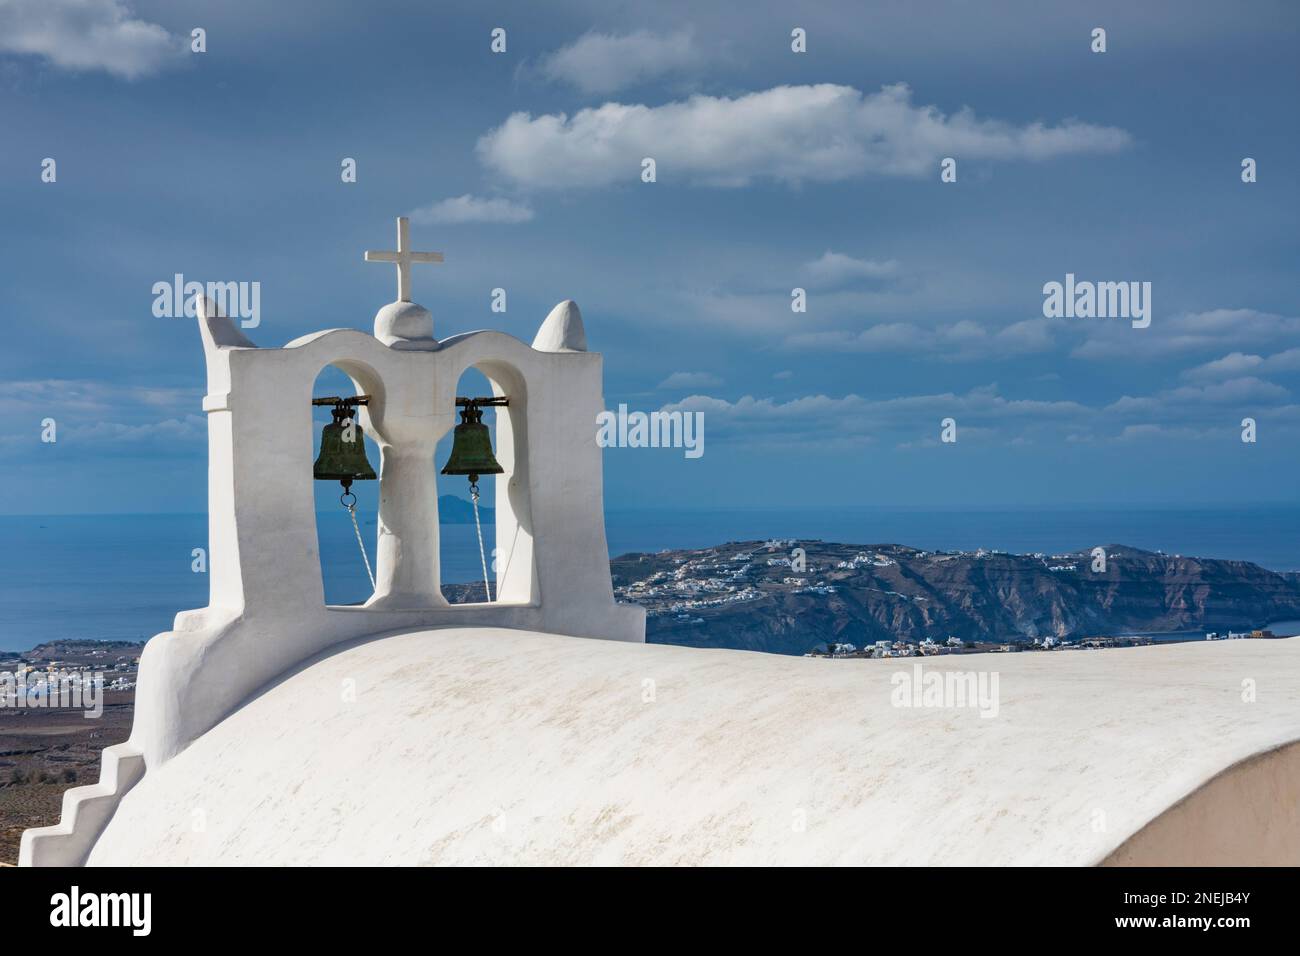 Characteristic whitewashed bell tower with curved roof, Santorini Stock Photo